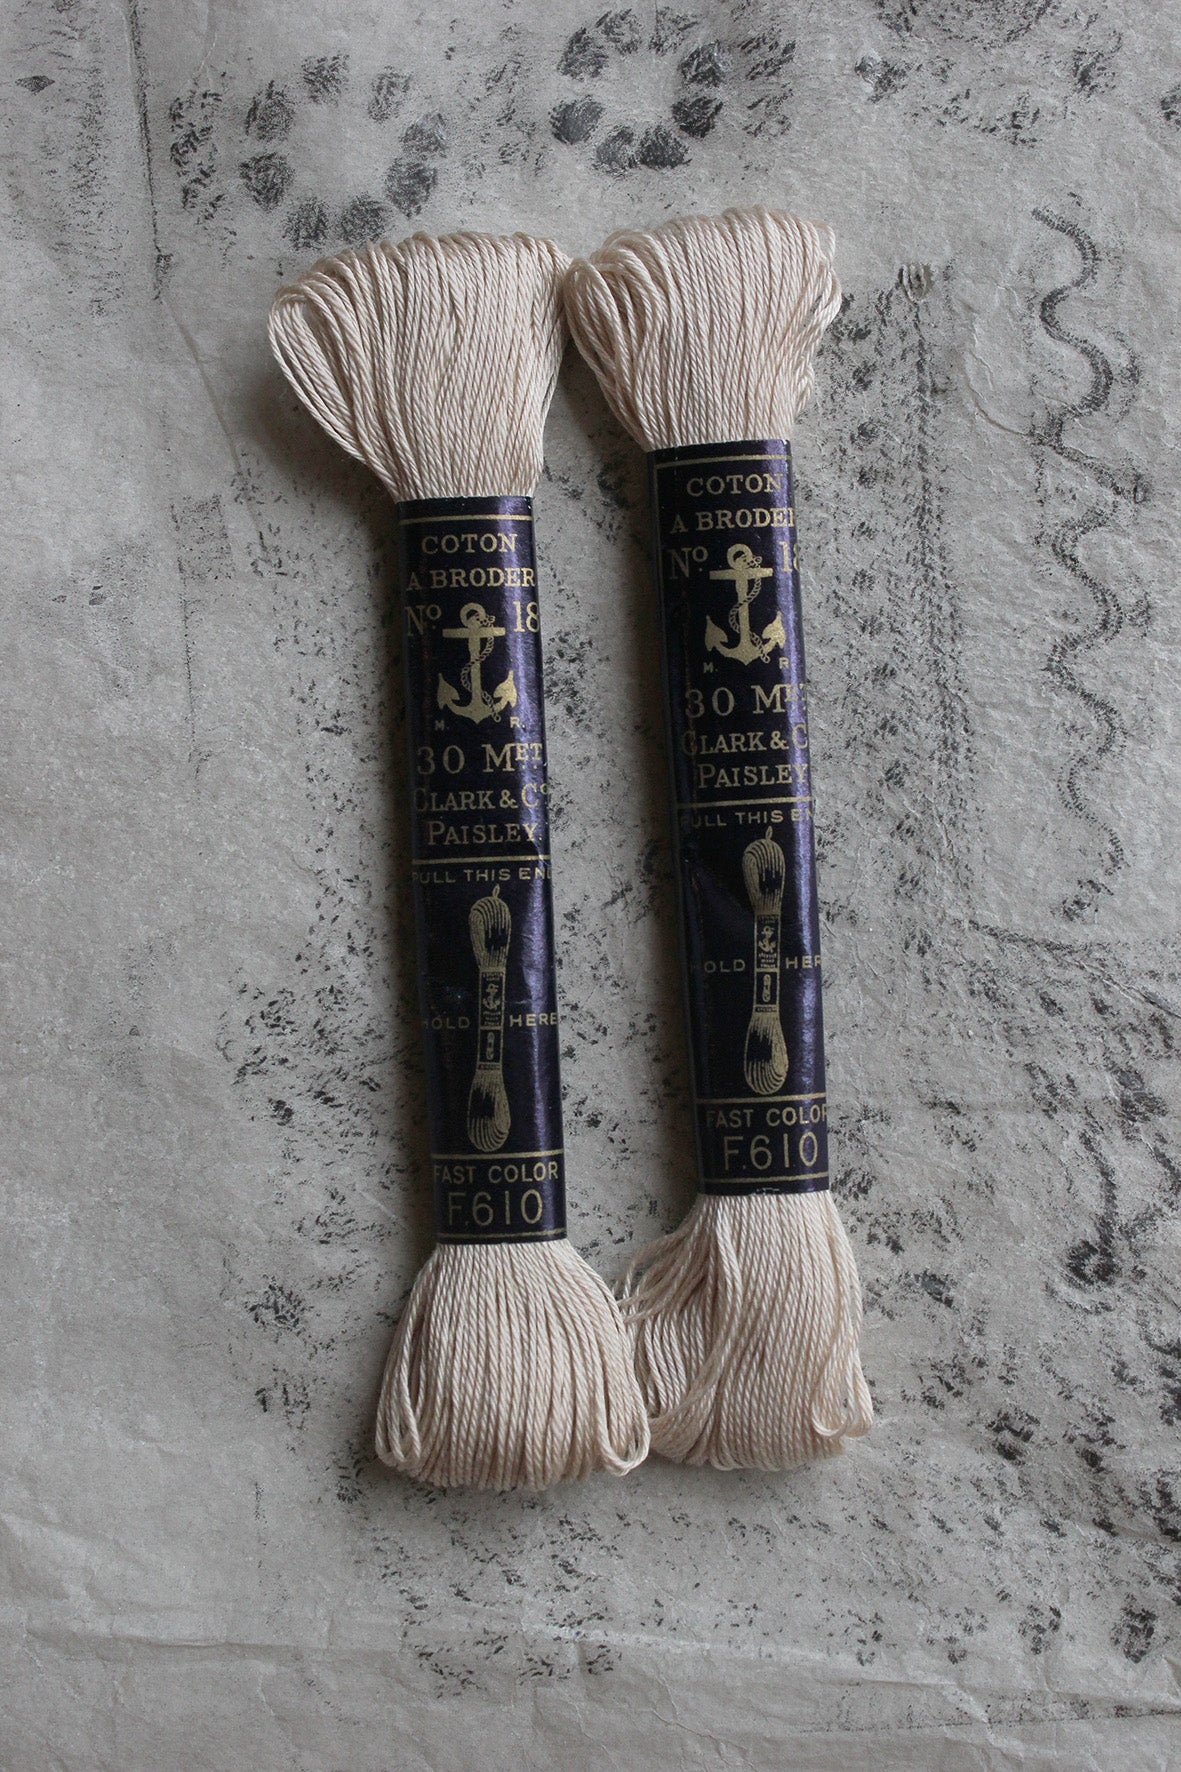 Old Skeins of Natural Broderie Cotton